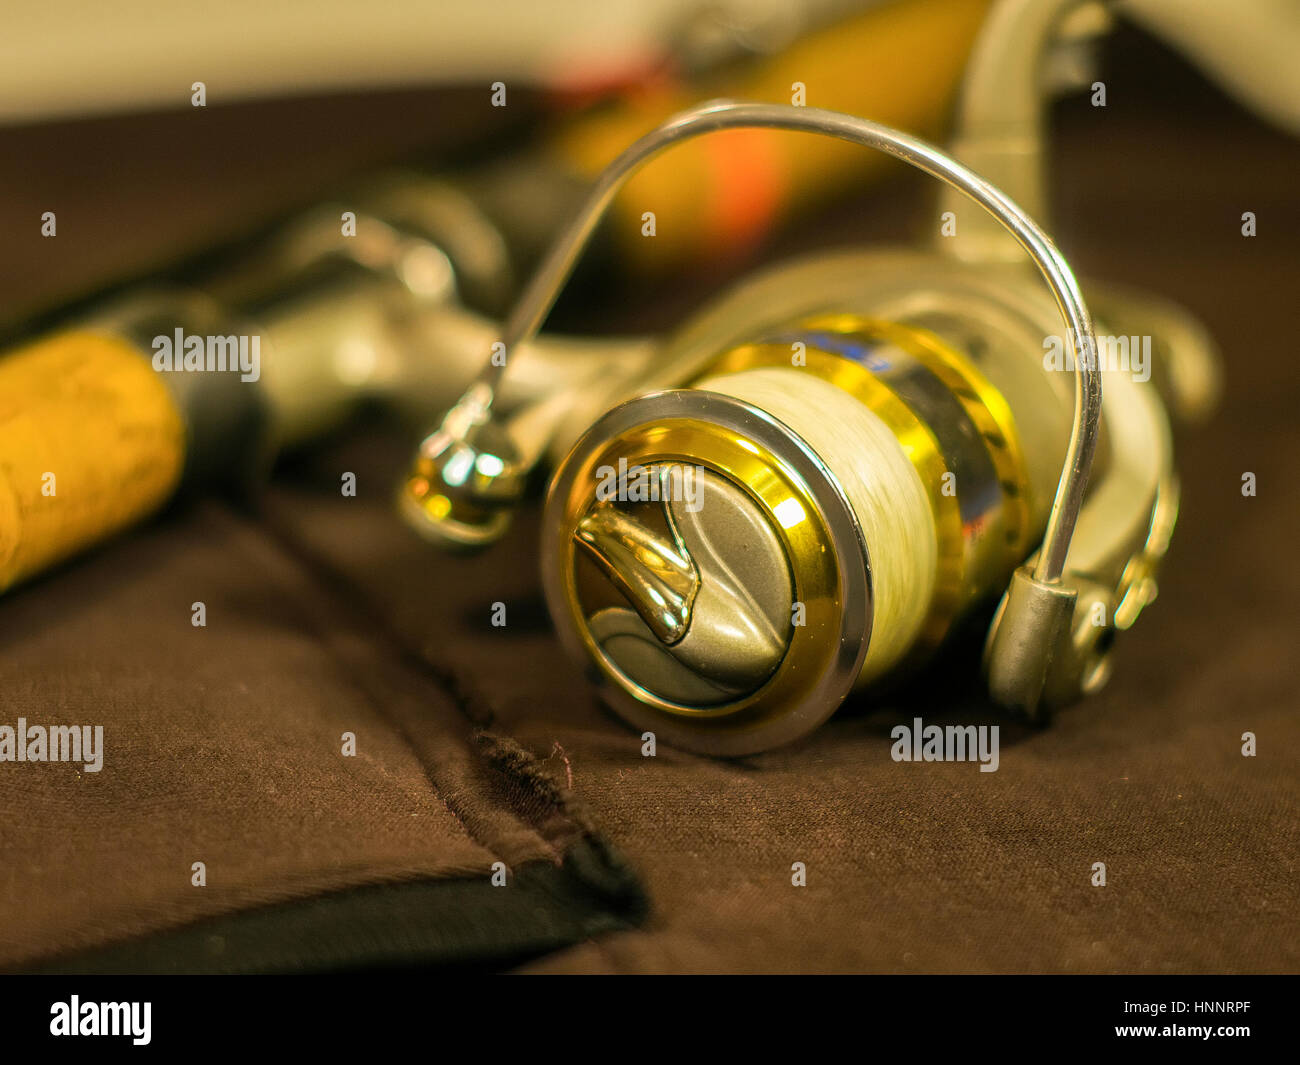 The fishing reels on the fishing rod close-up Stock Photo